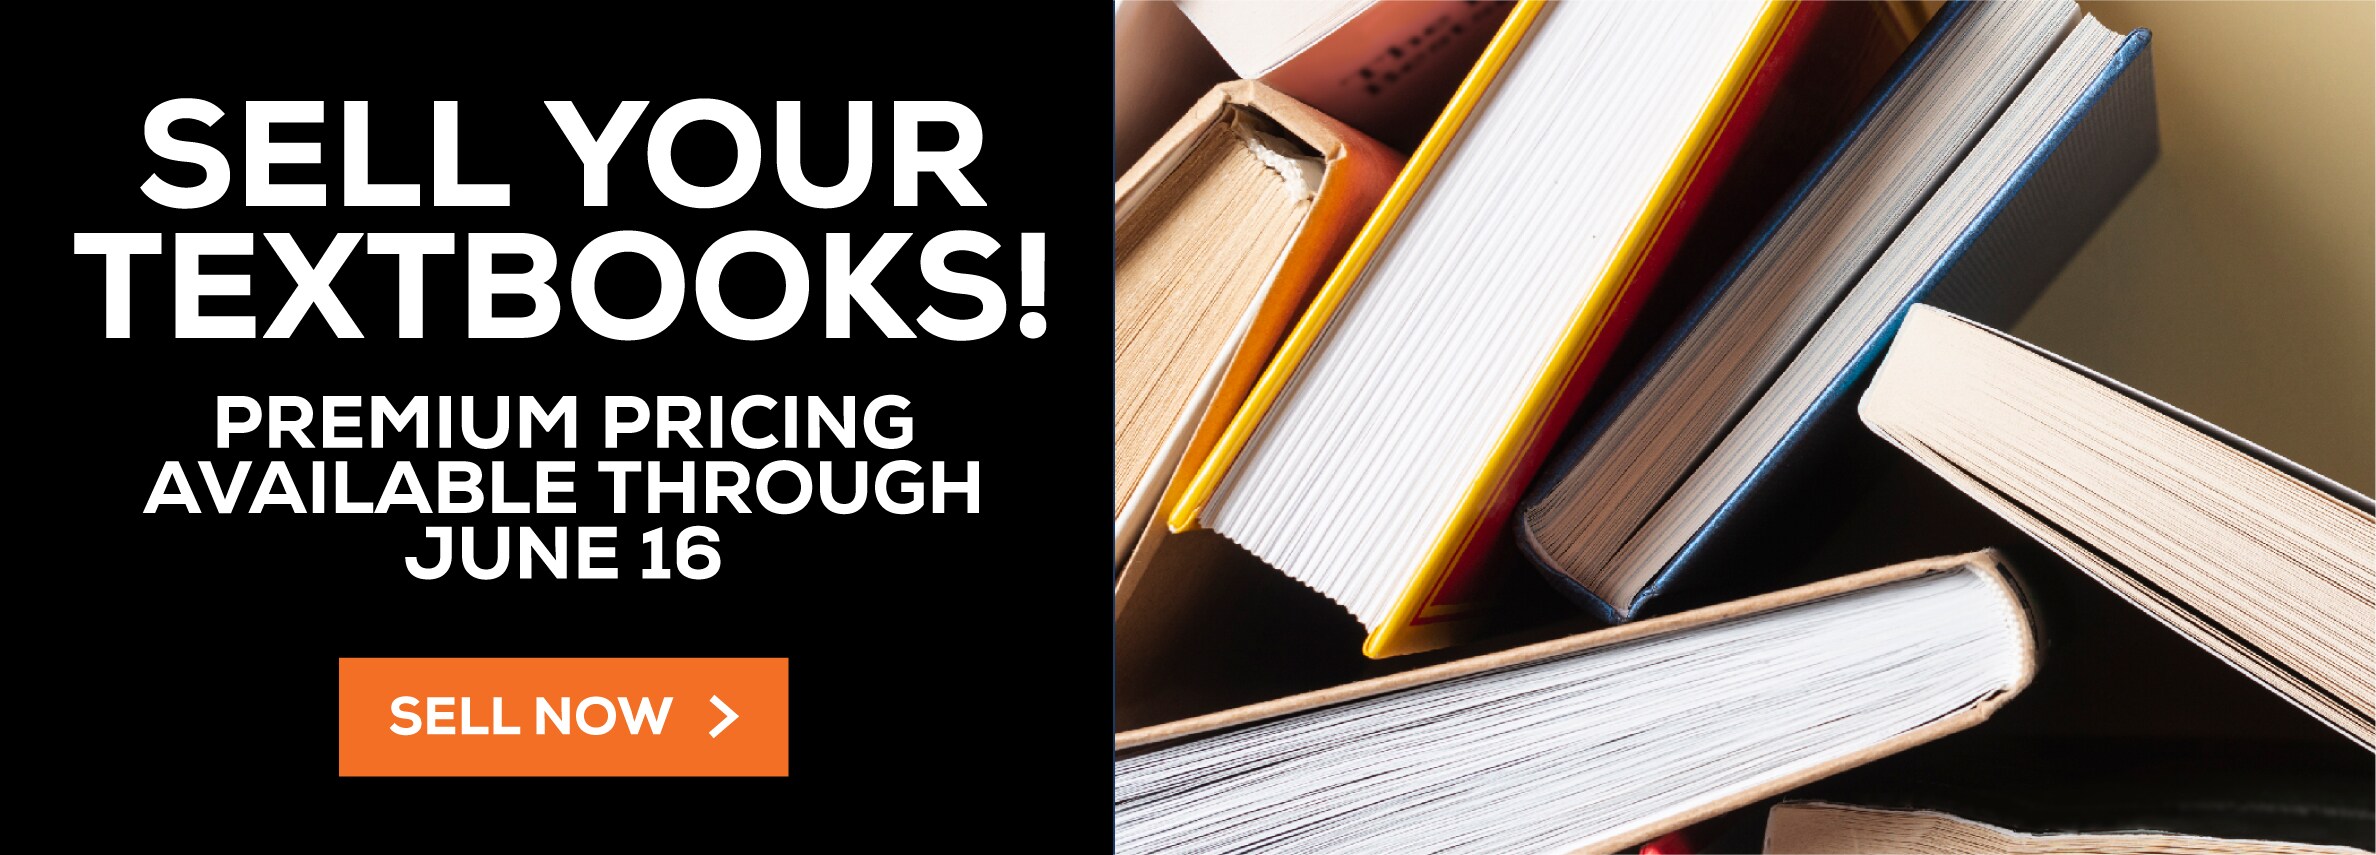 Sell Your Textbooks! Premium pricing available through June 16. Sell Now!					